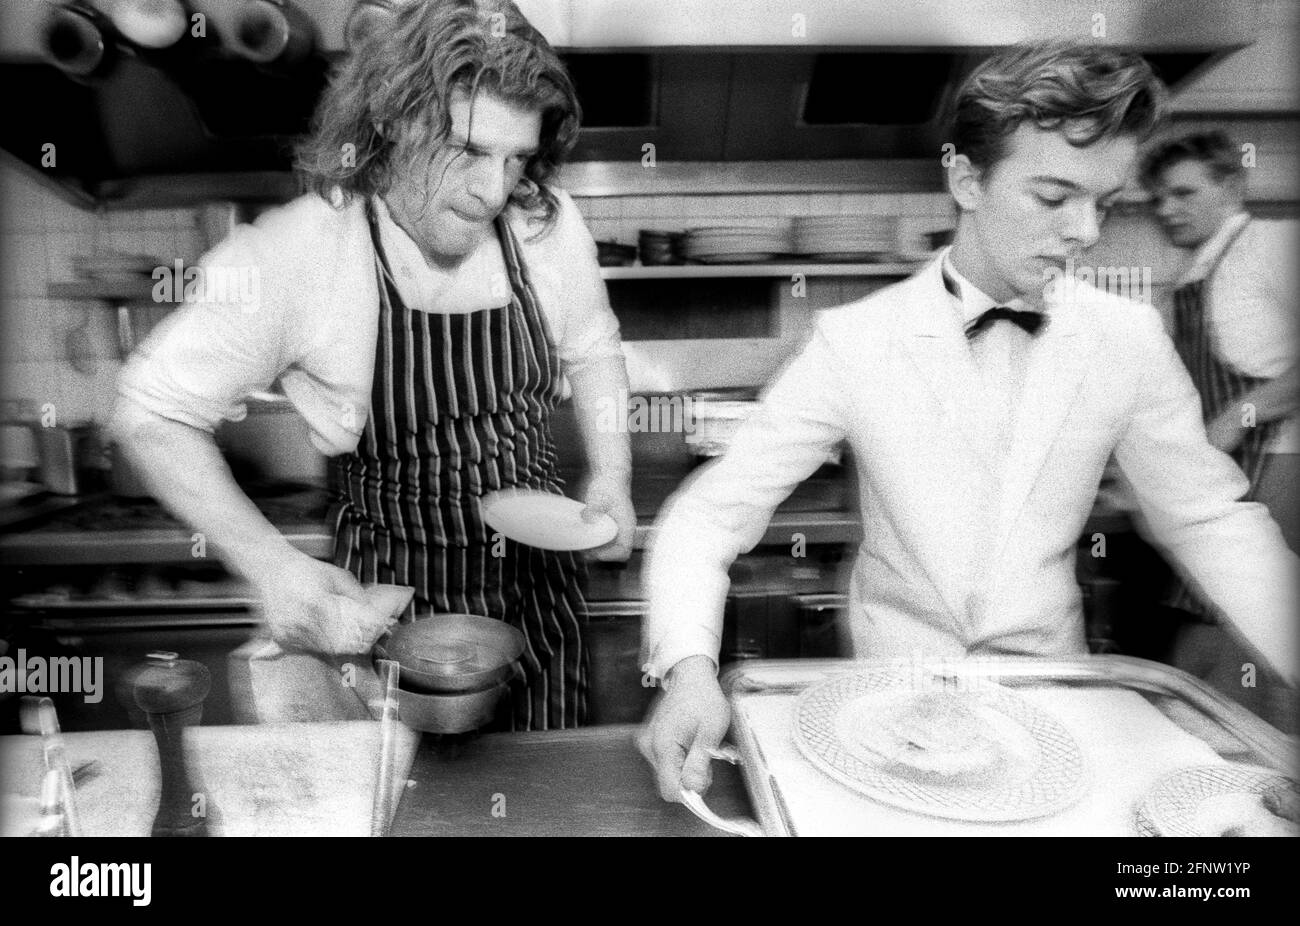 Celebrity chef Marco Pierre White with assistant or 2nd chef, Gordon Ramsey at Harvey's restaurant, during MPW's supremacy as London's top young chef. Stock Photo